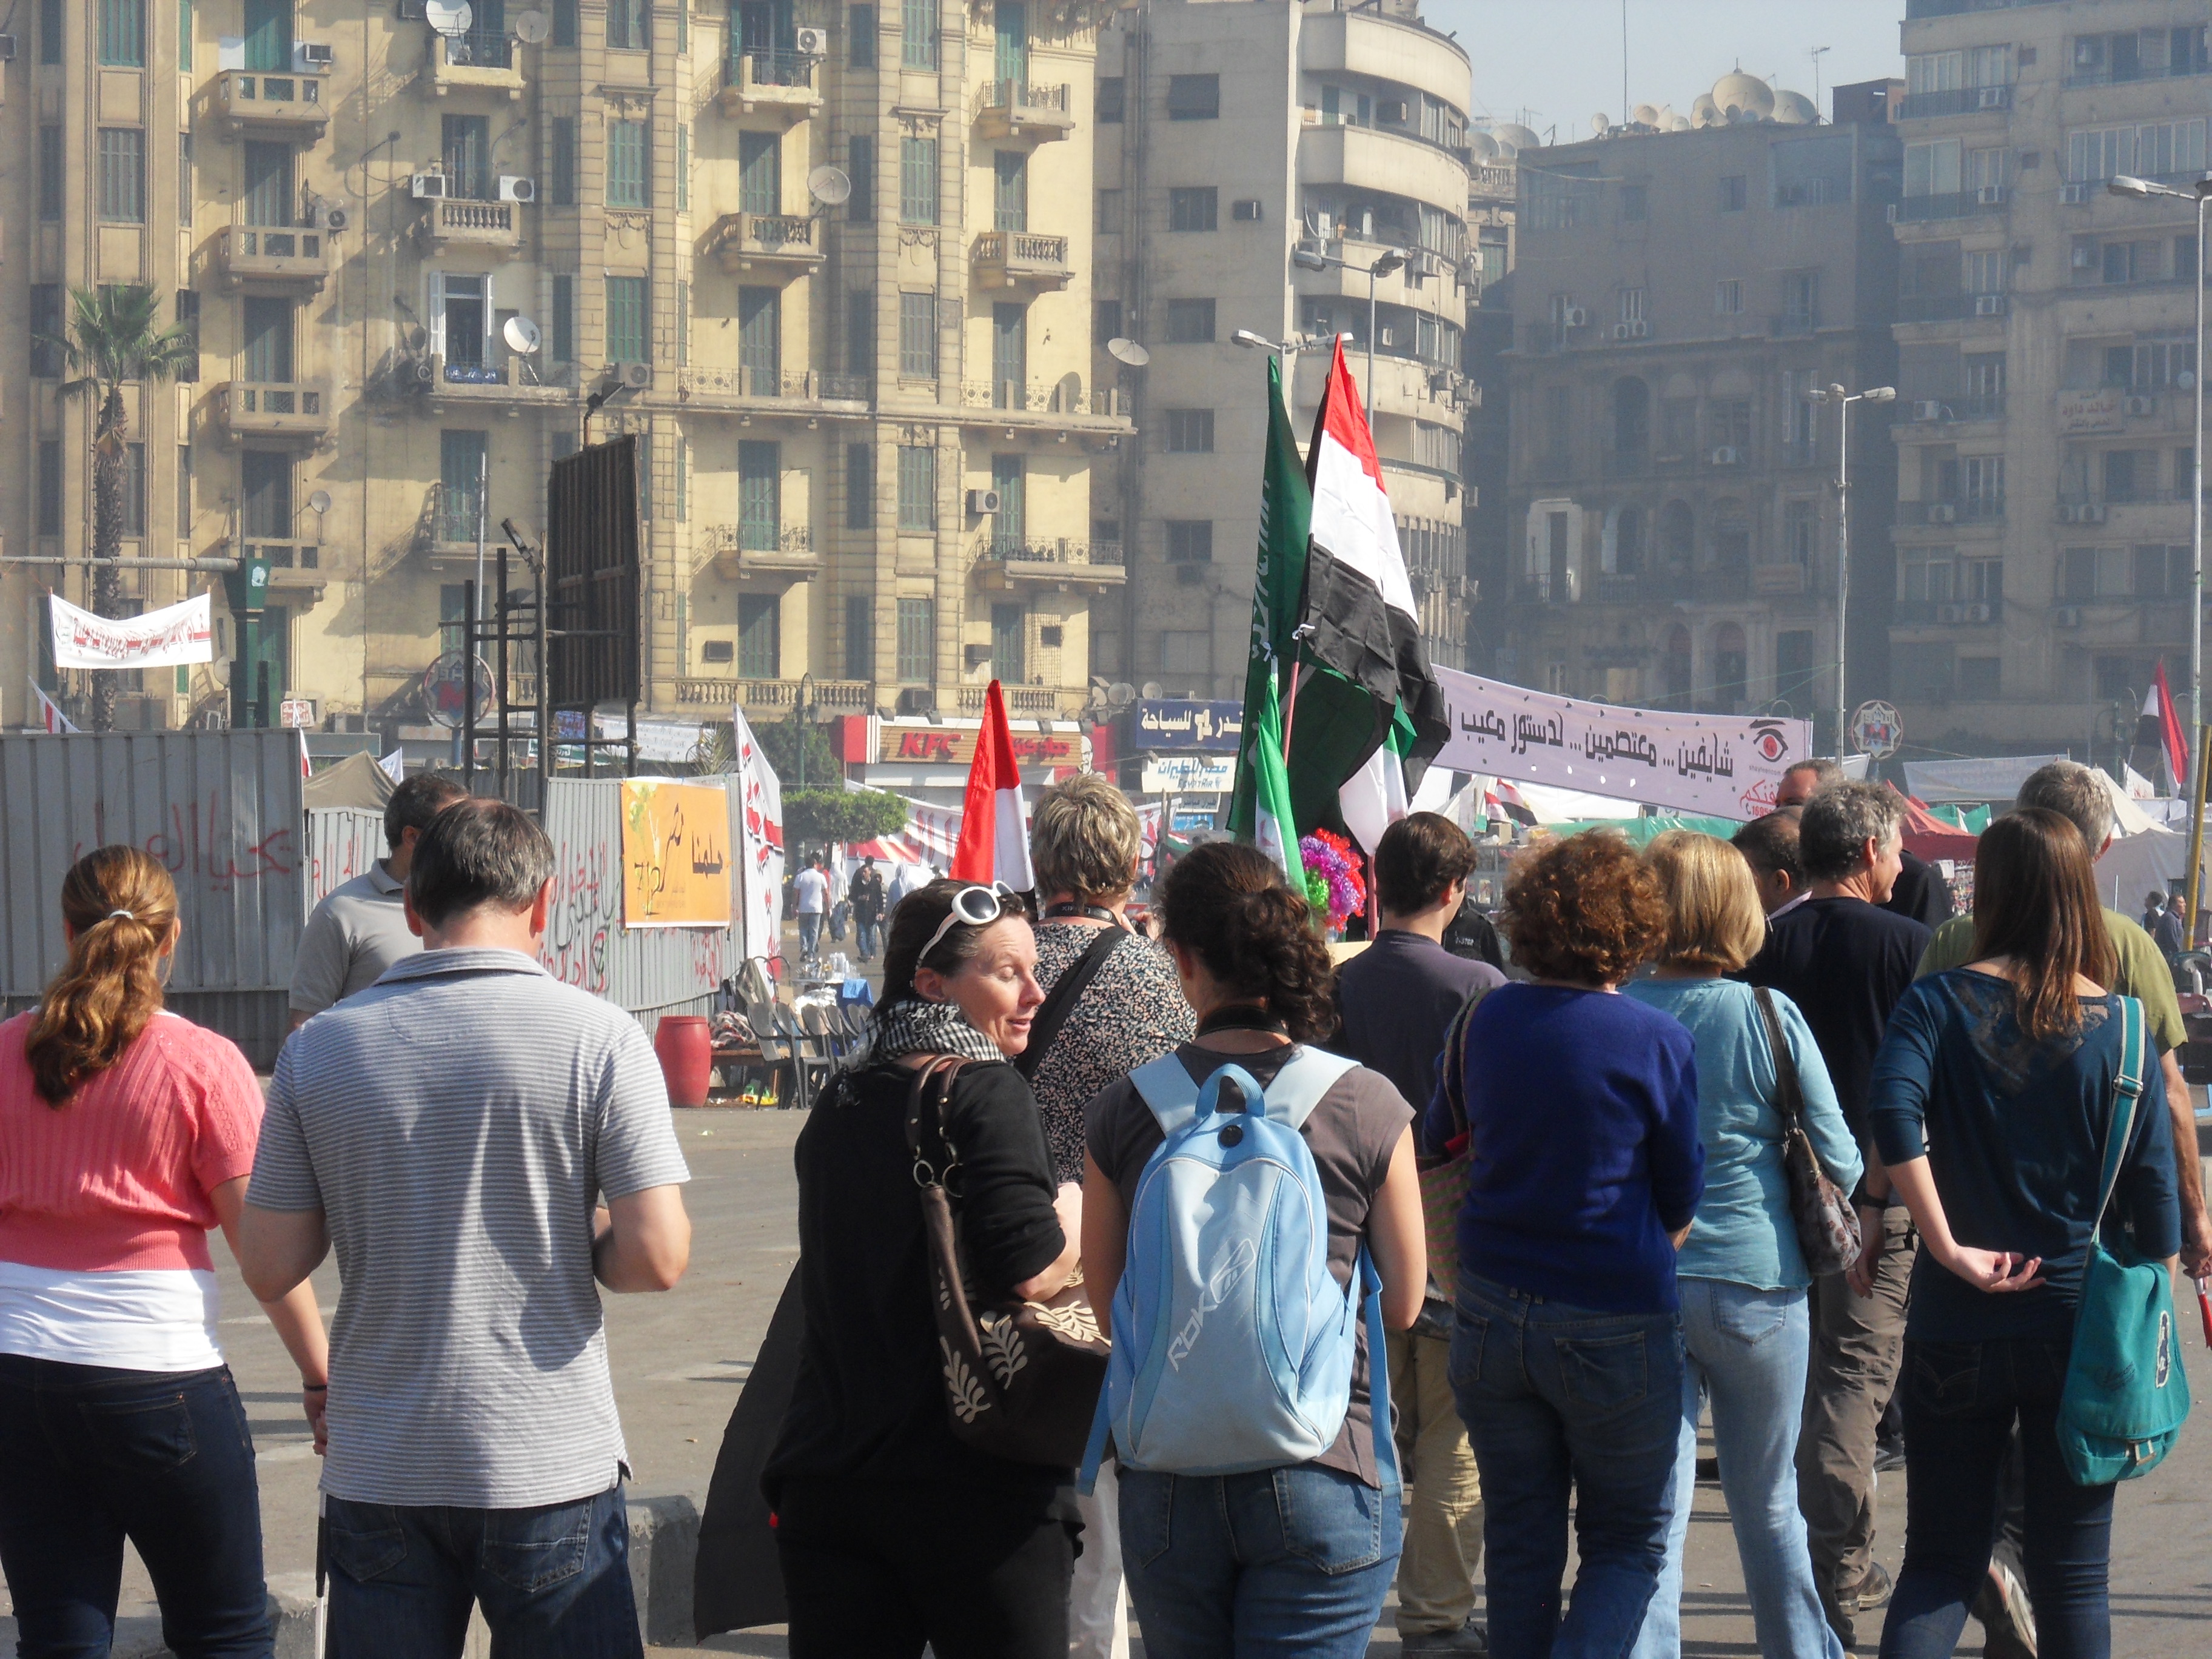 One of the tour groups entering Tahrir Square